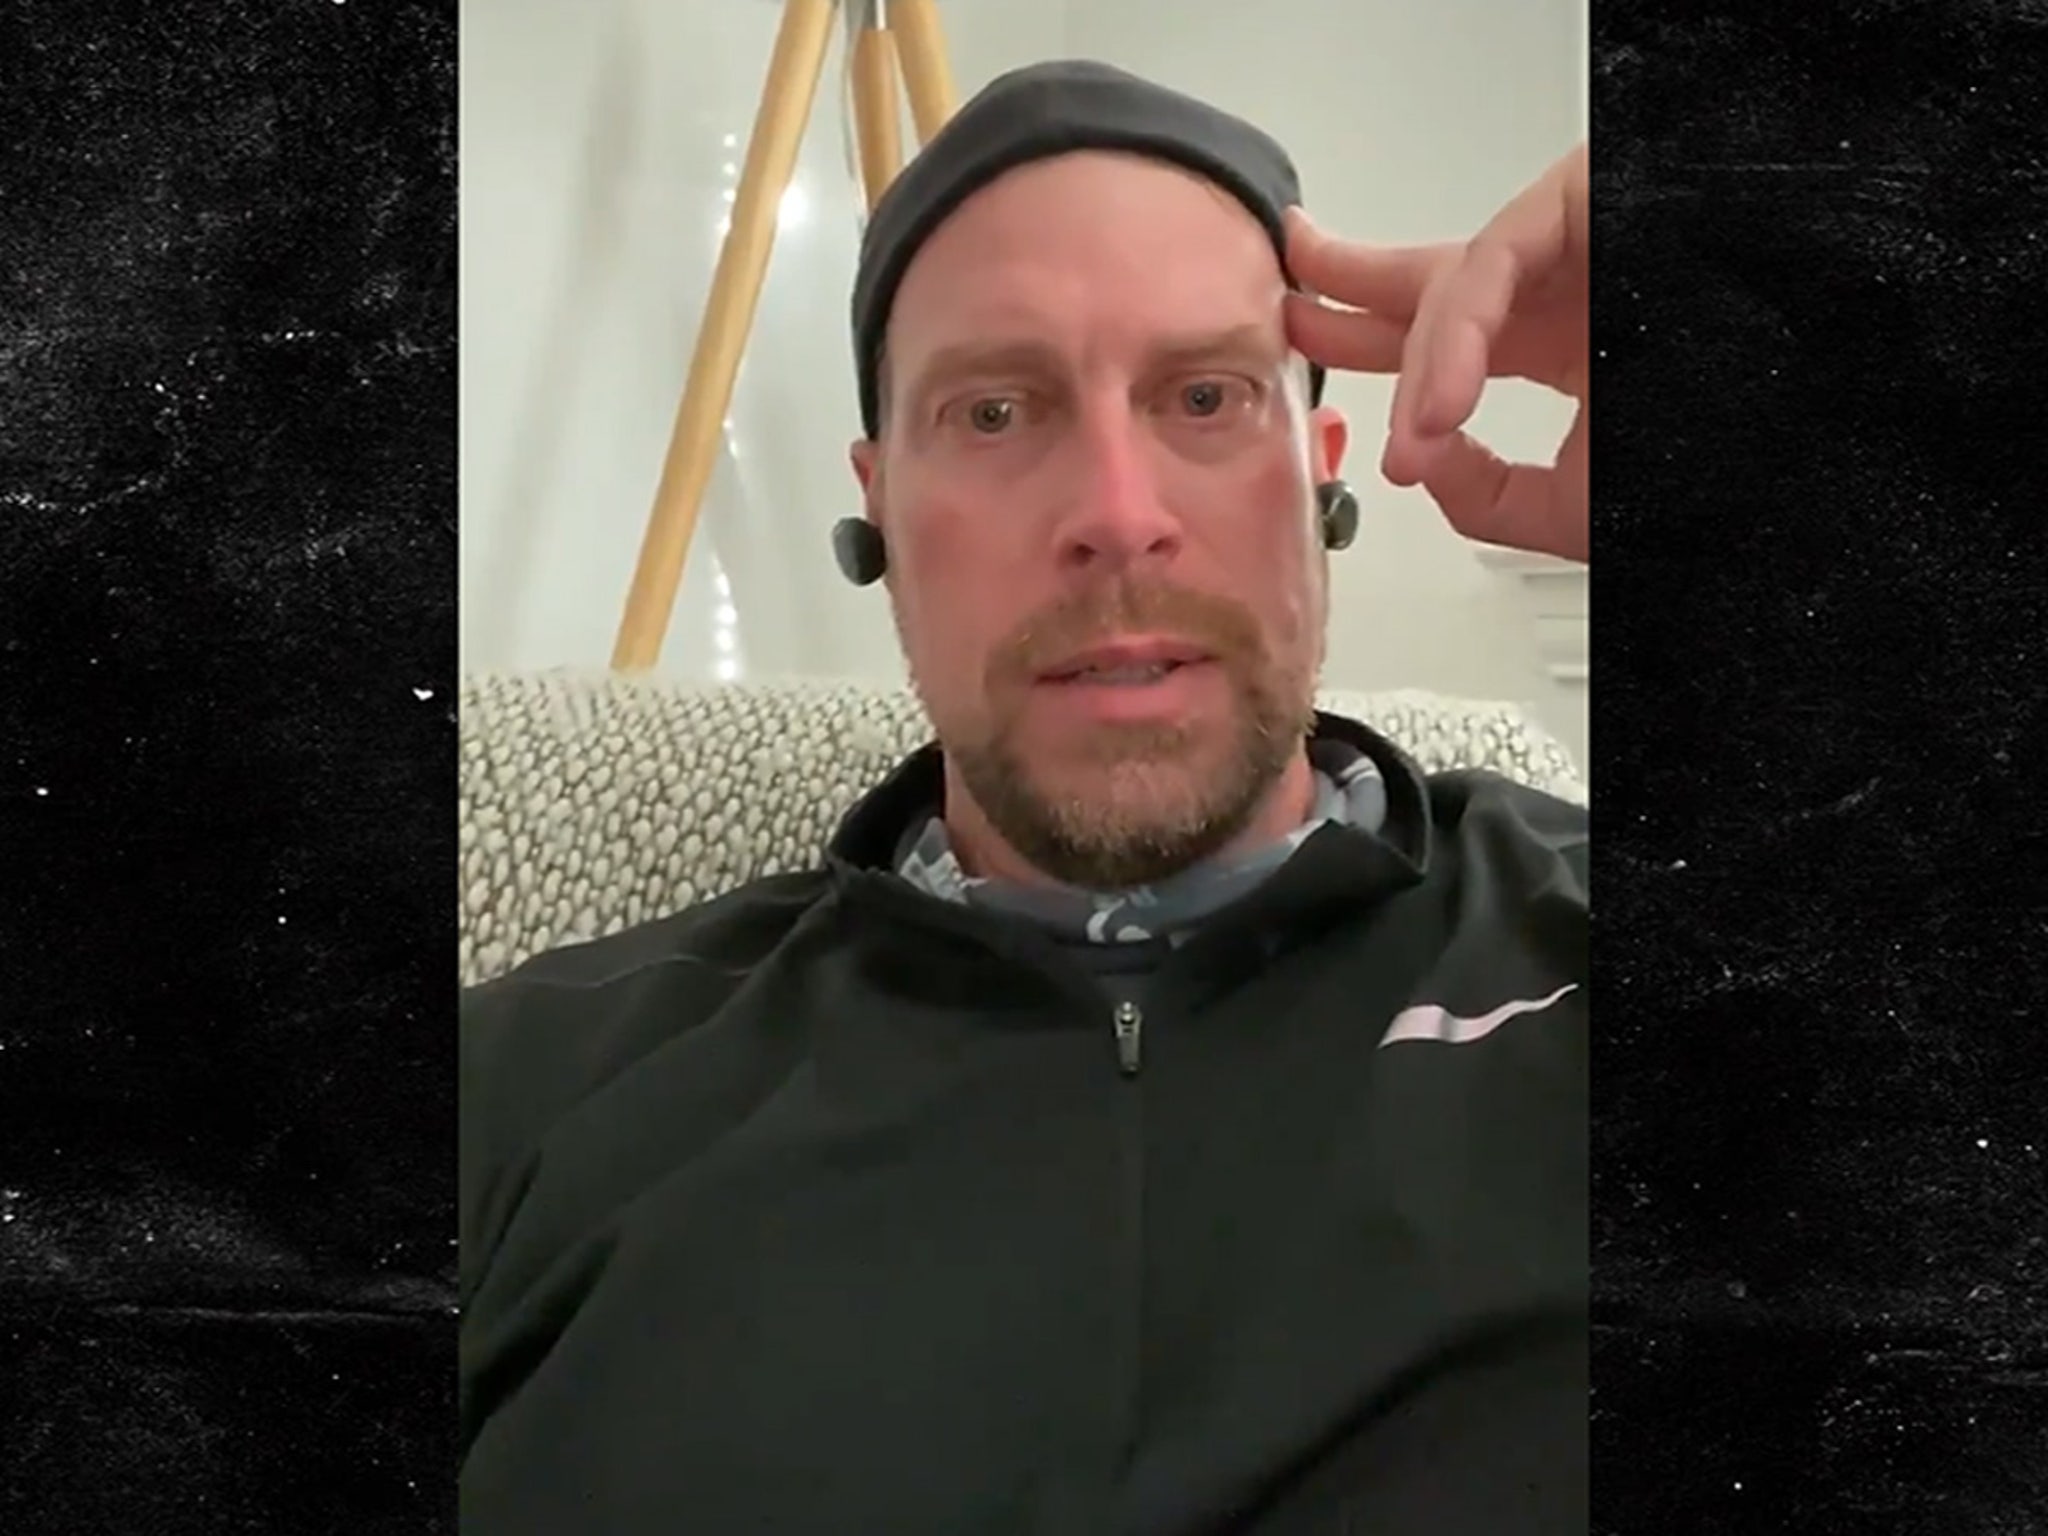 Ryan Leaf couldn't escape his past at WT